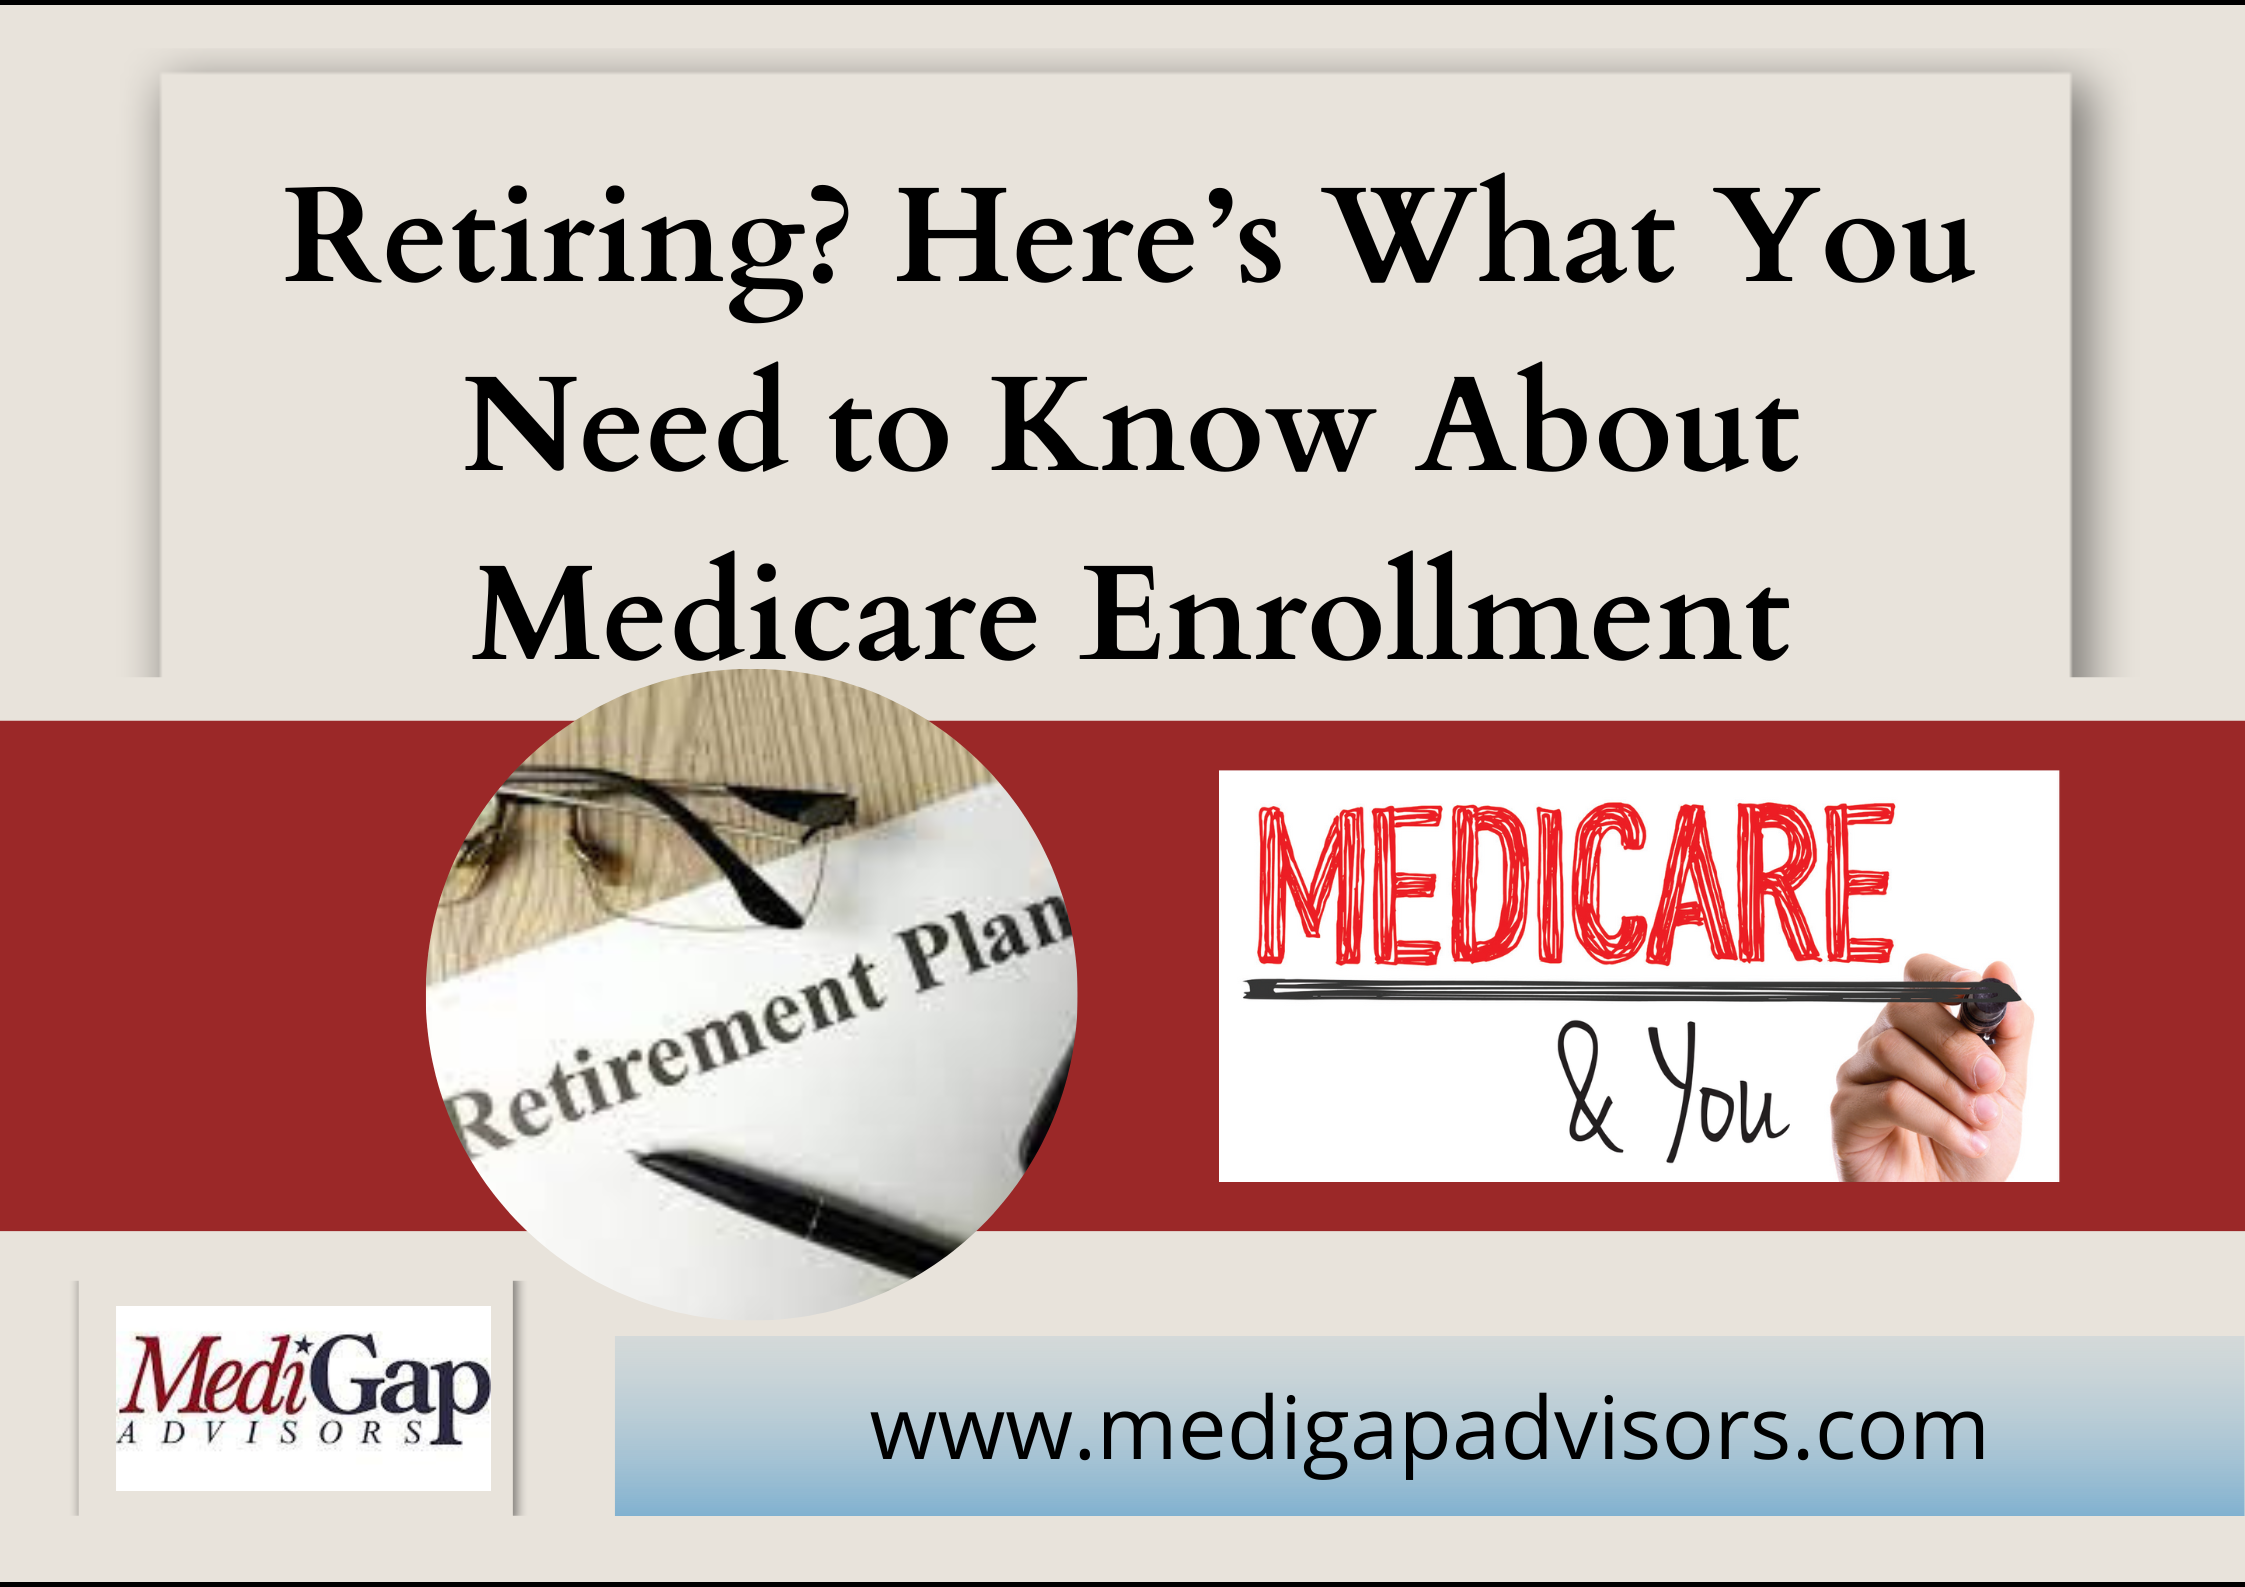 Retiring in 2023? Here’s What You Need to Know About Medicare Enrollment